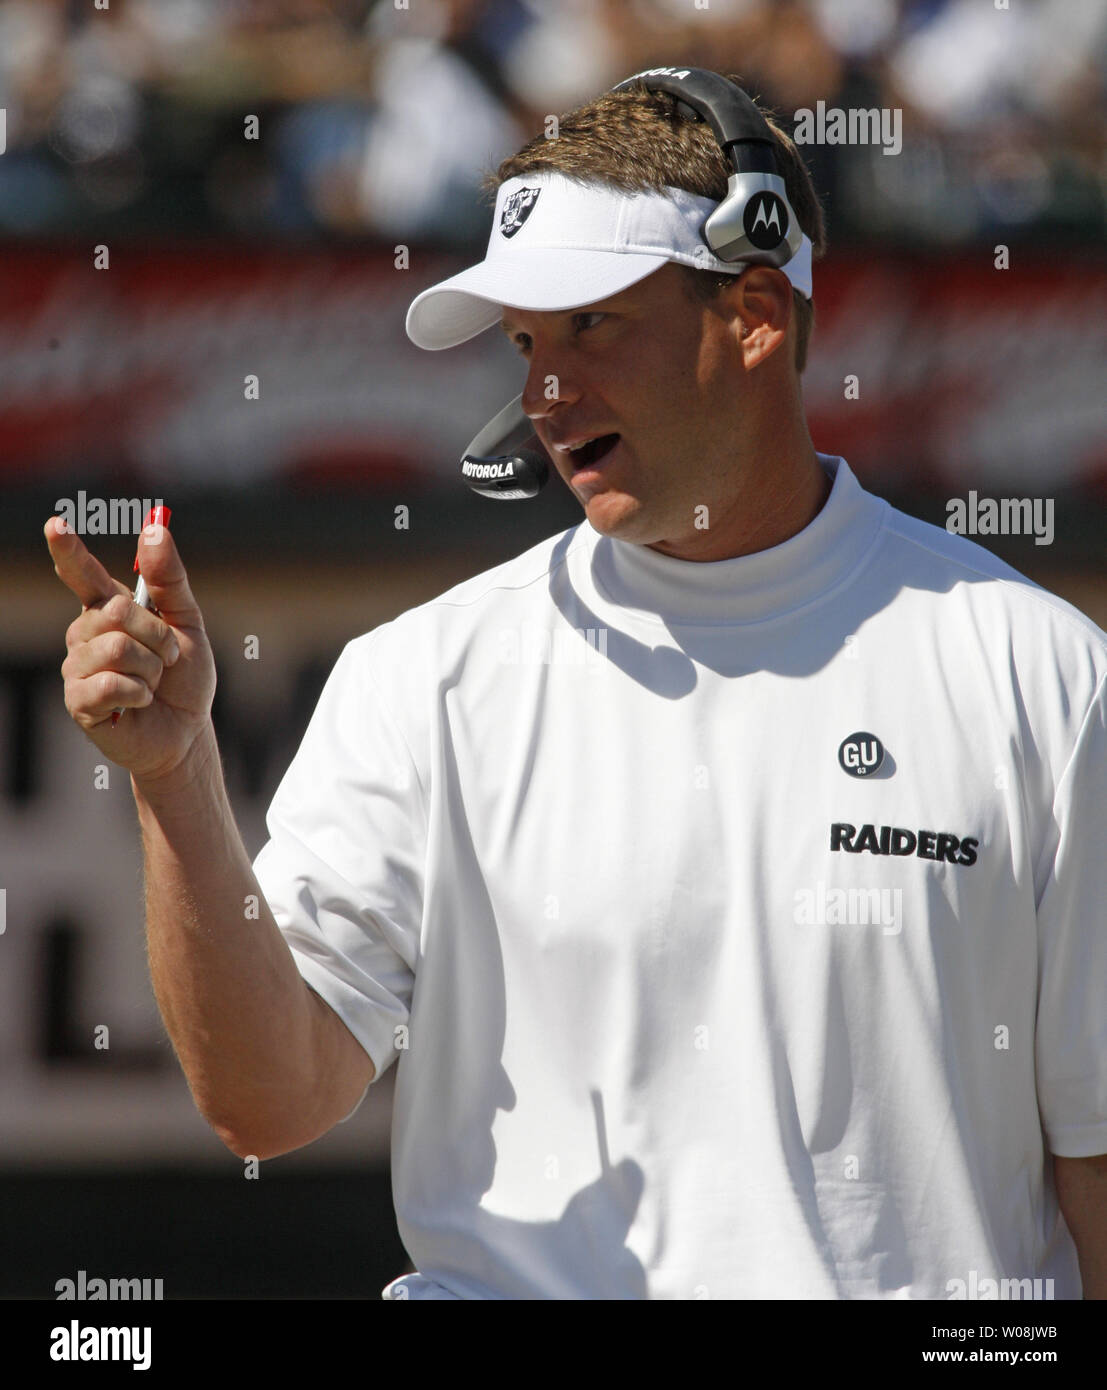 Oakland Raiders head coach Lane Kiffin has a word with a player  during play against the San Diego Chargers at the Coliseum in Oakland, California on September 28, 2008. The Chargers defeated the Raiders 28-18.  (UPI Photo/Terry Schmitt) Stock Photo